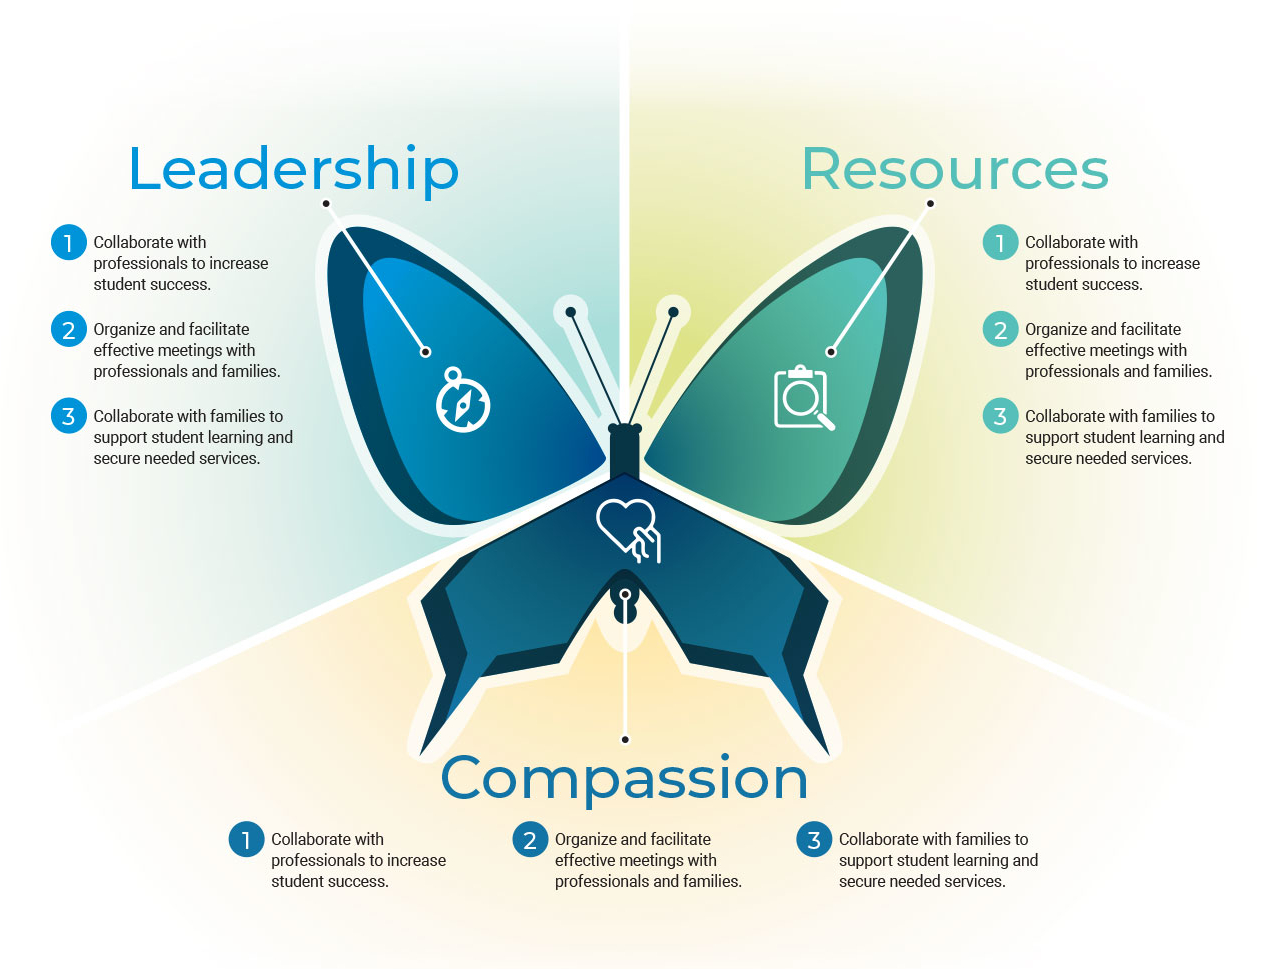 Leadership, Resources, Compassion